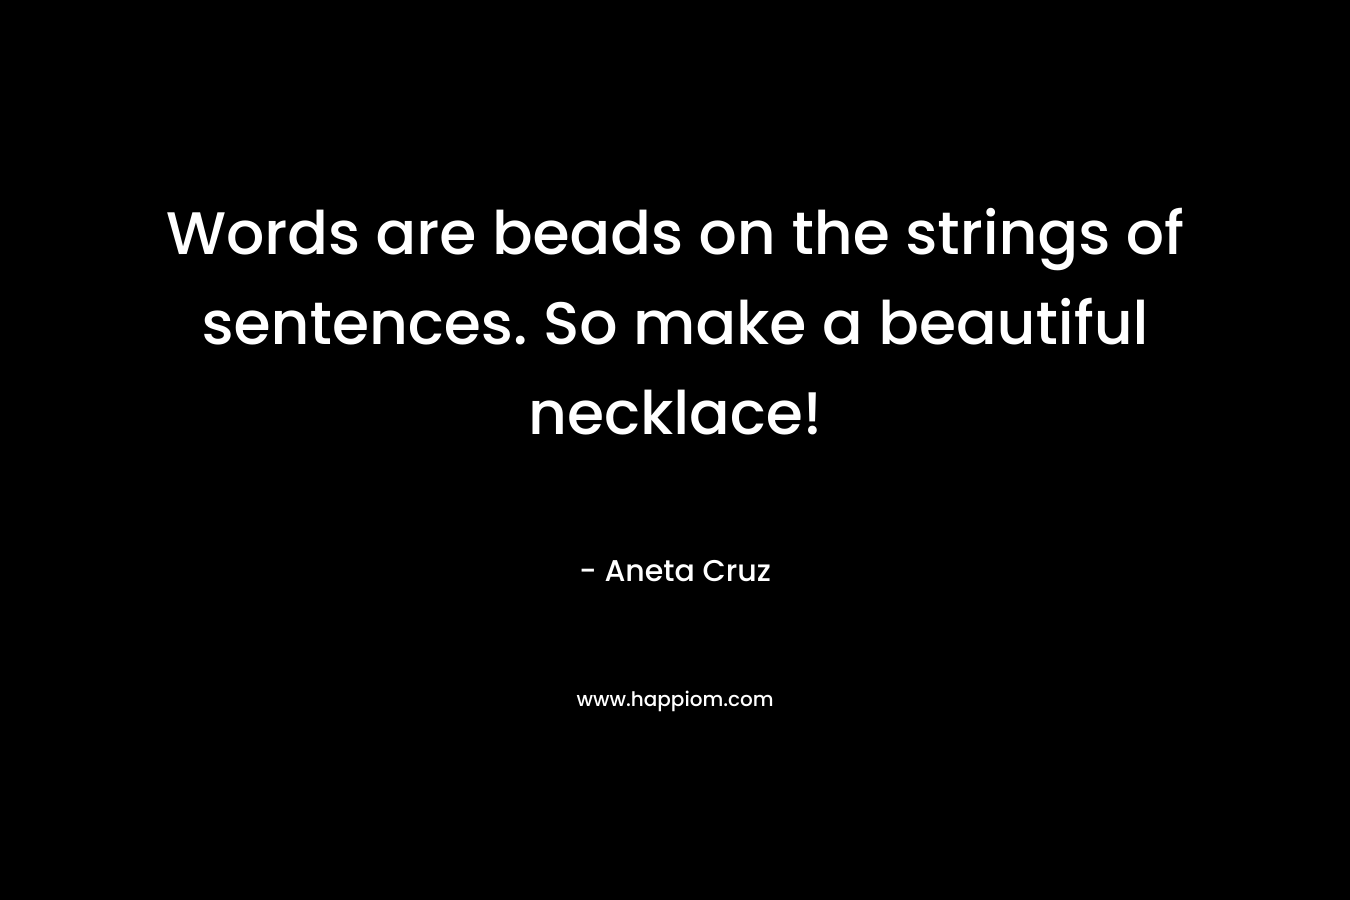 Words are beads on the strings of sentences. So make a beautiful necklace! – Aneta Cruz